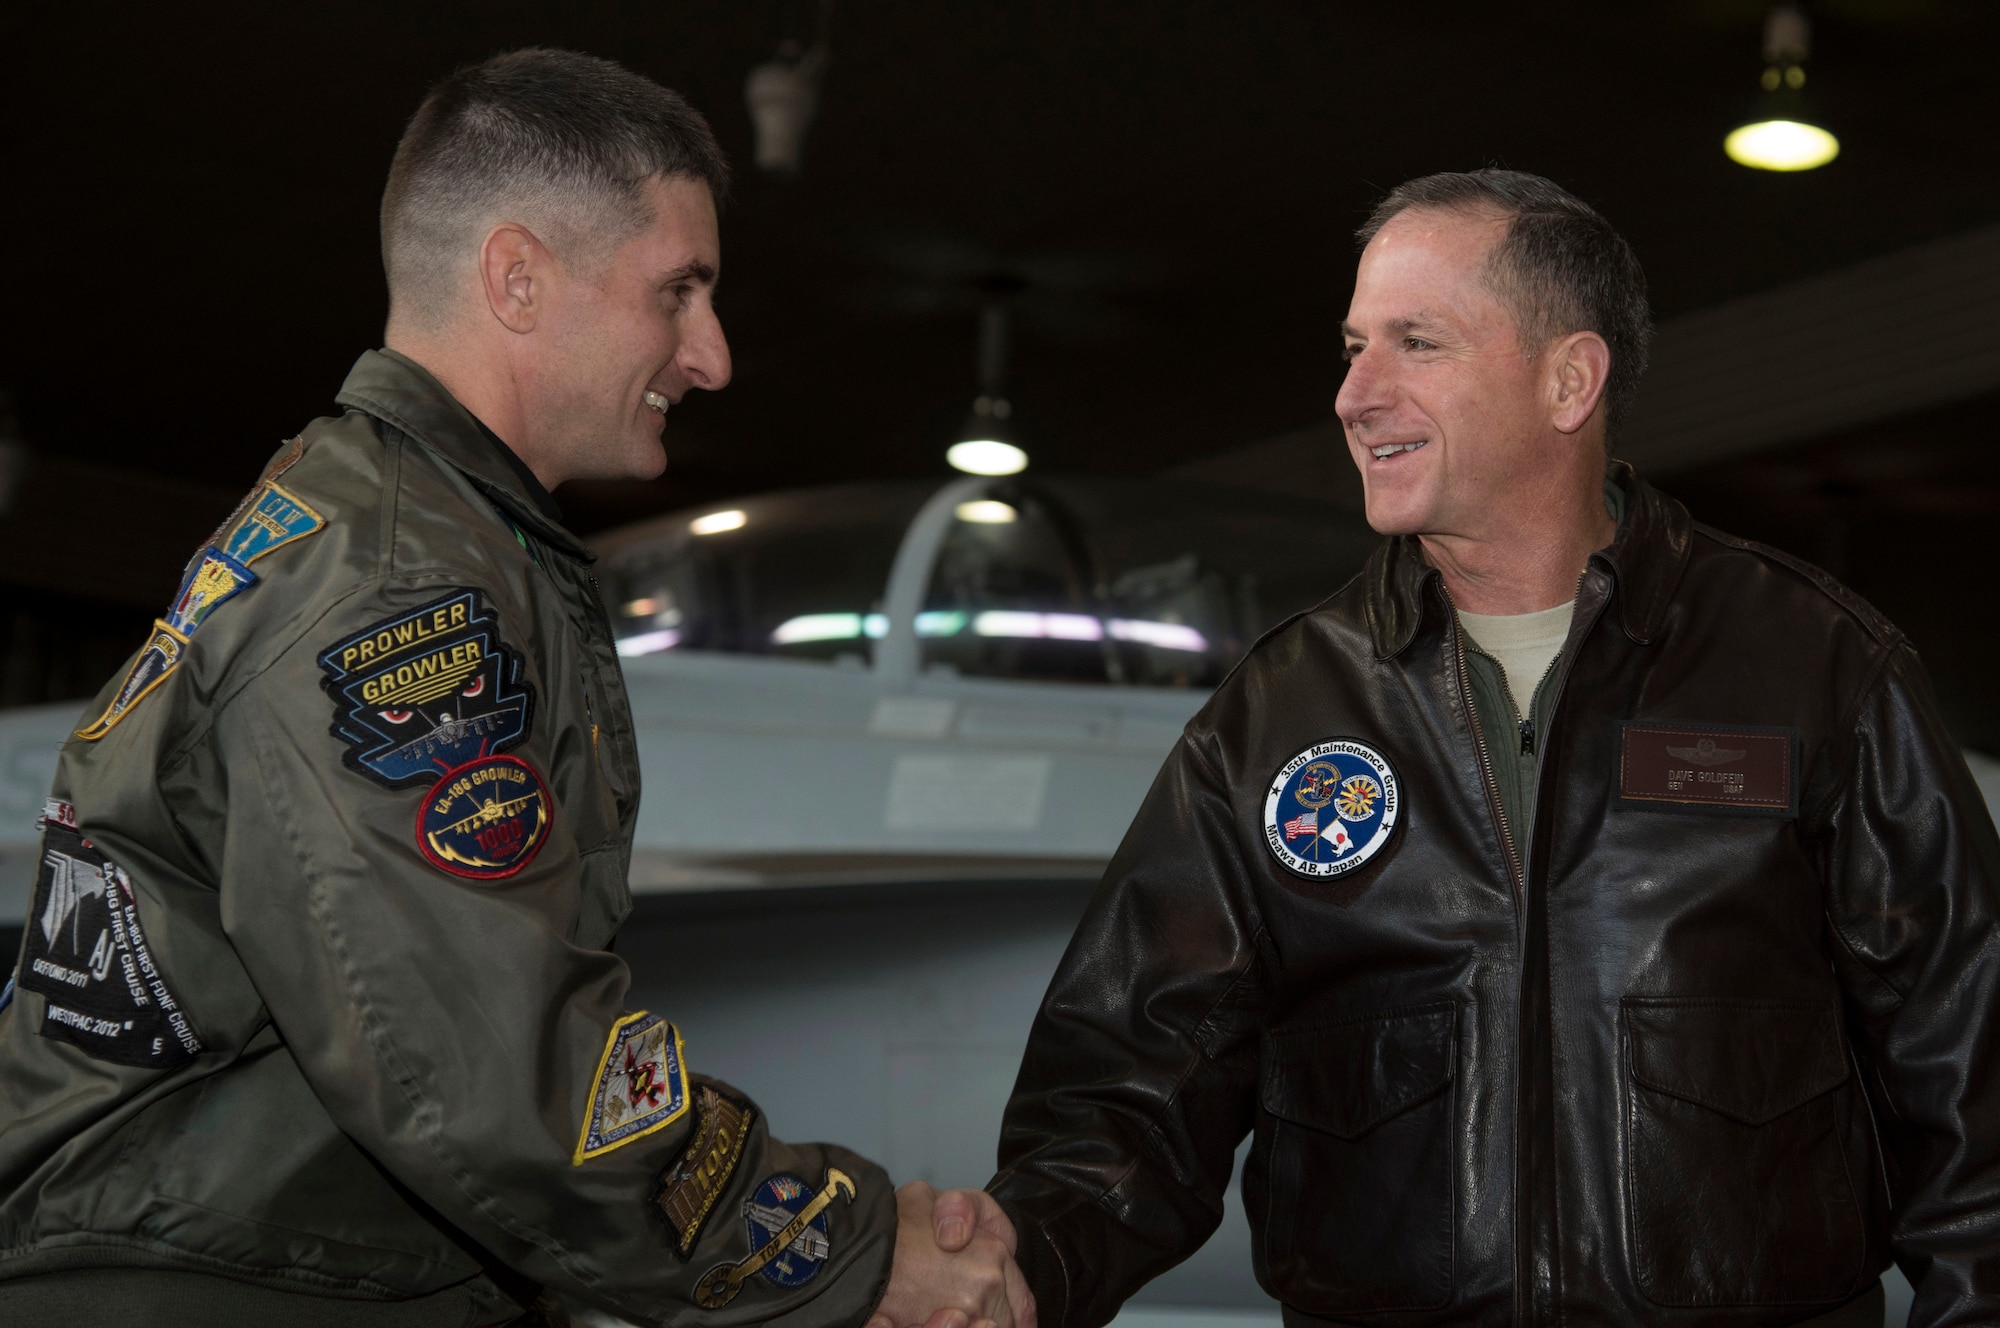 U.S. Navy Commander Michael Lisa, left, the VAQ-135 executive officer, shakes hands with Air Force Chief of Staff, Gen. David L. Goldfein, right, during his immersion tour at Misawa Air Base, Japan, Nov. 9, 2016. During his immersion tour, Goldfein took time to address many opportunities Airmen and their civilian counterparts have at Misawa, while discussing his focus areas as CSAF. (U.S. Air Force photo by Airman 1st Class Sadie Colbert)